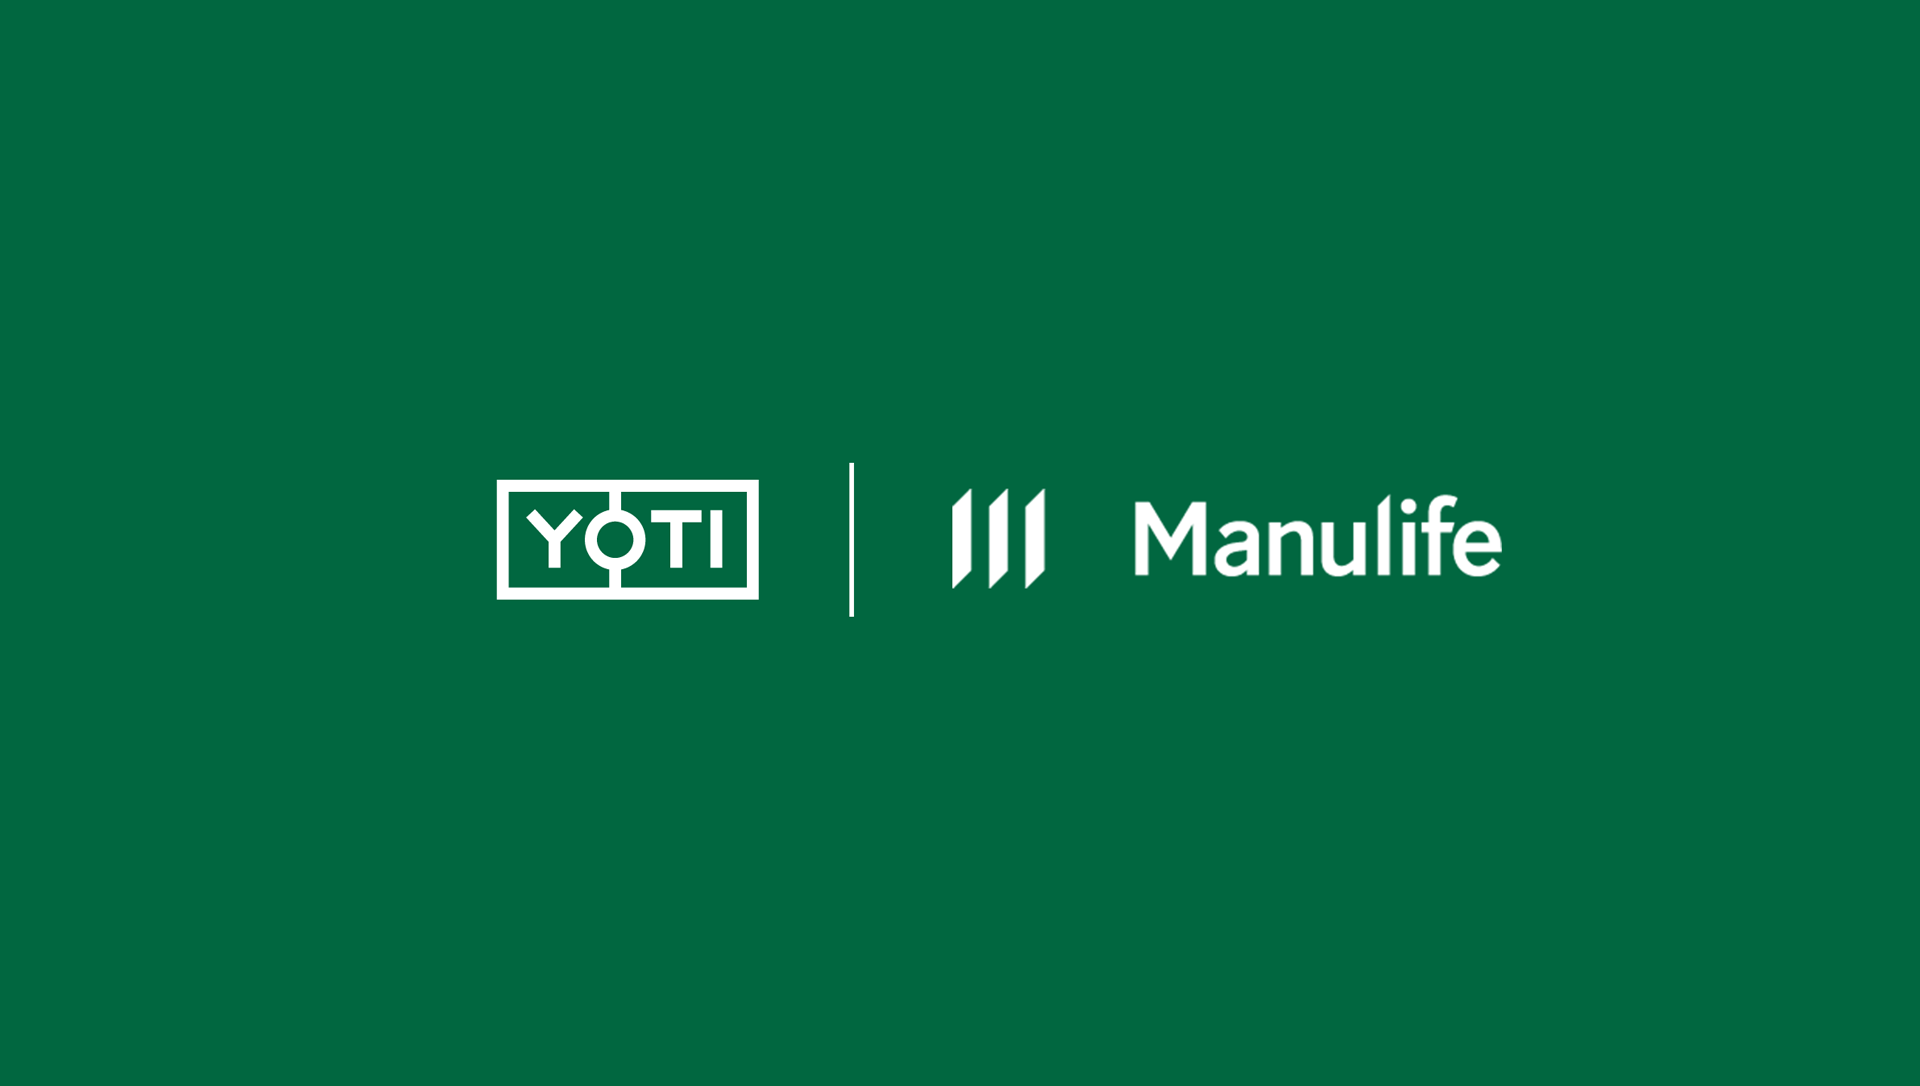 Yoti and Manulife partner for FINTRAC compliant identity verification